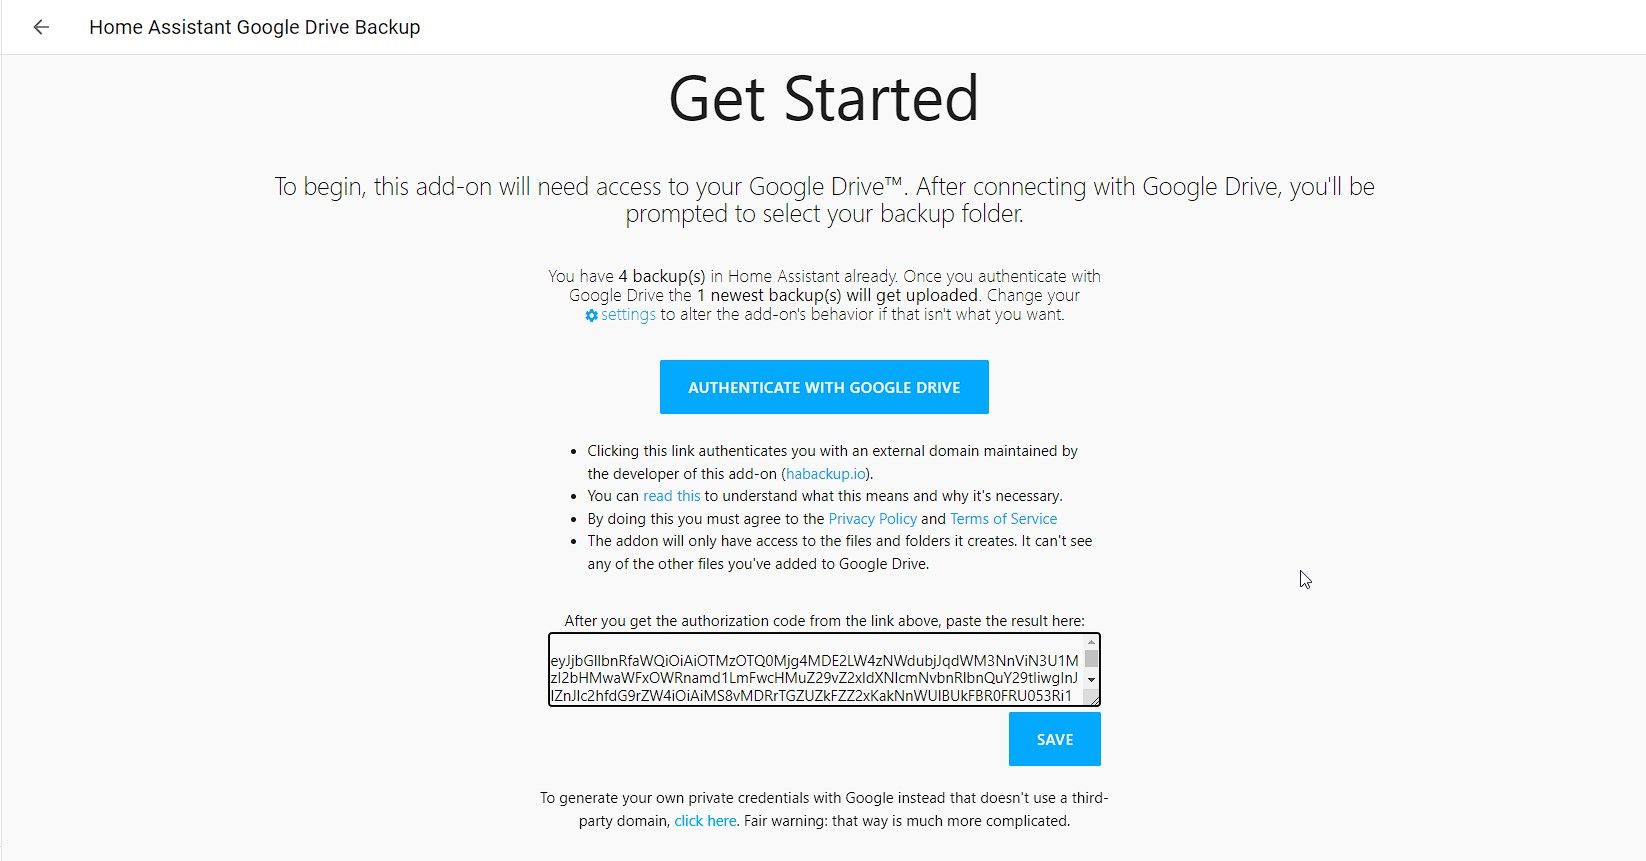 authorize home assistant google drive backup service